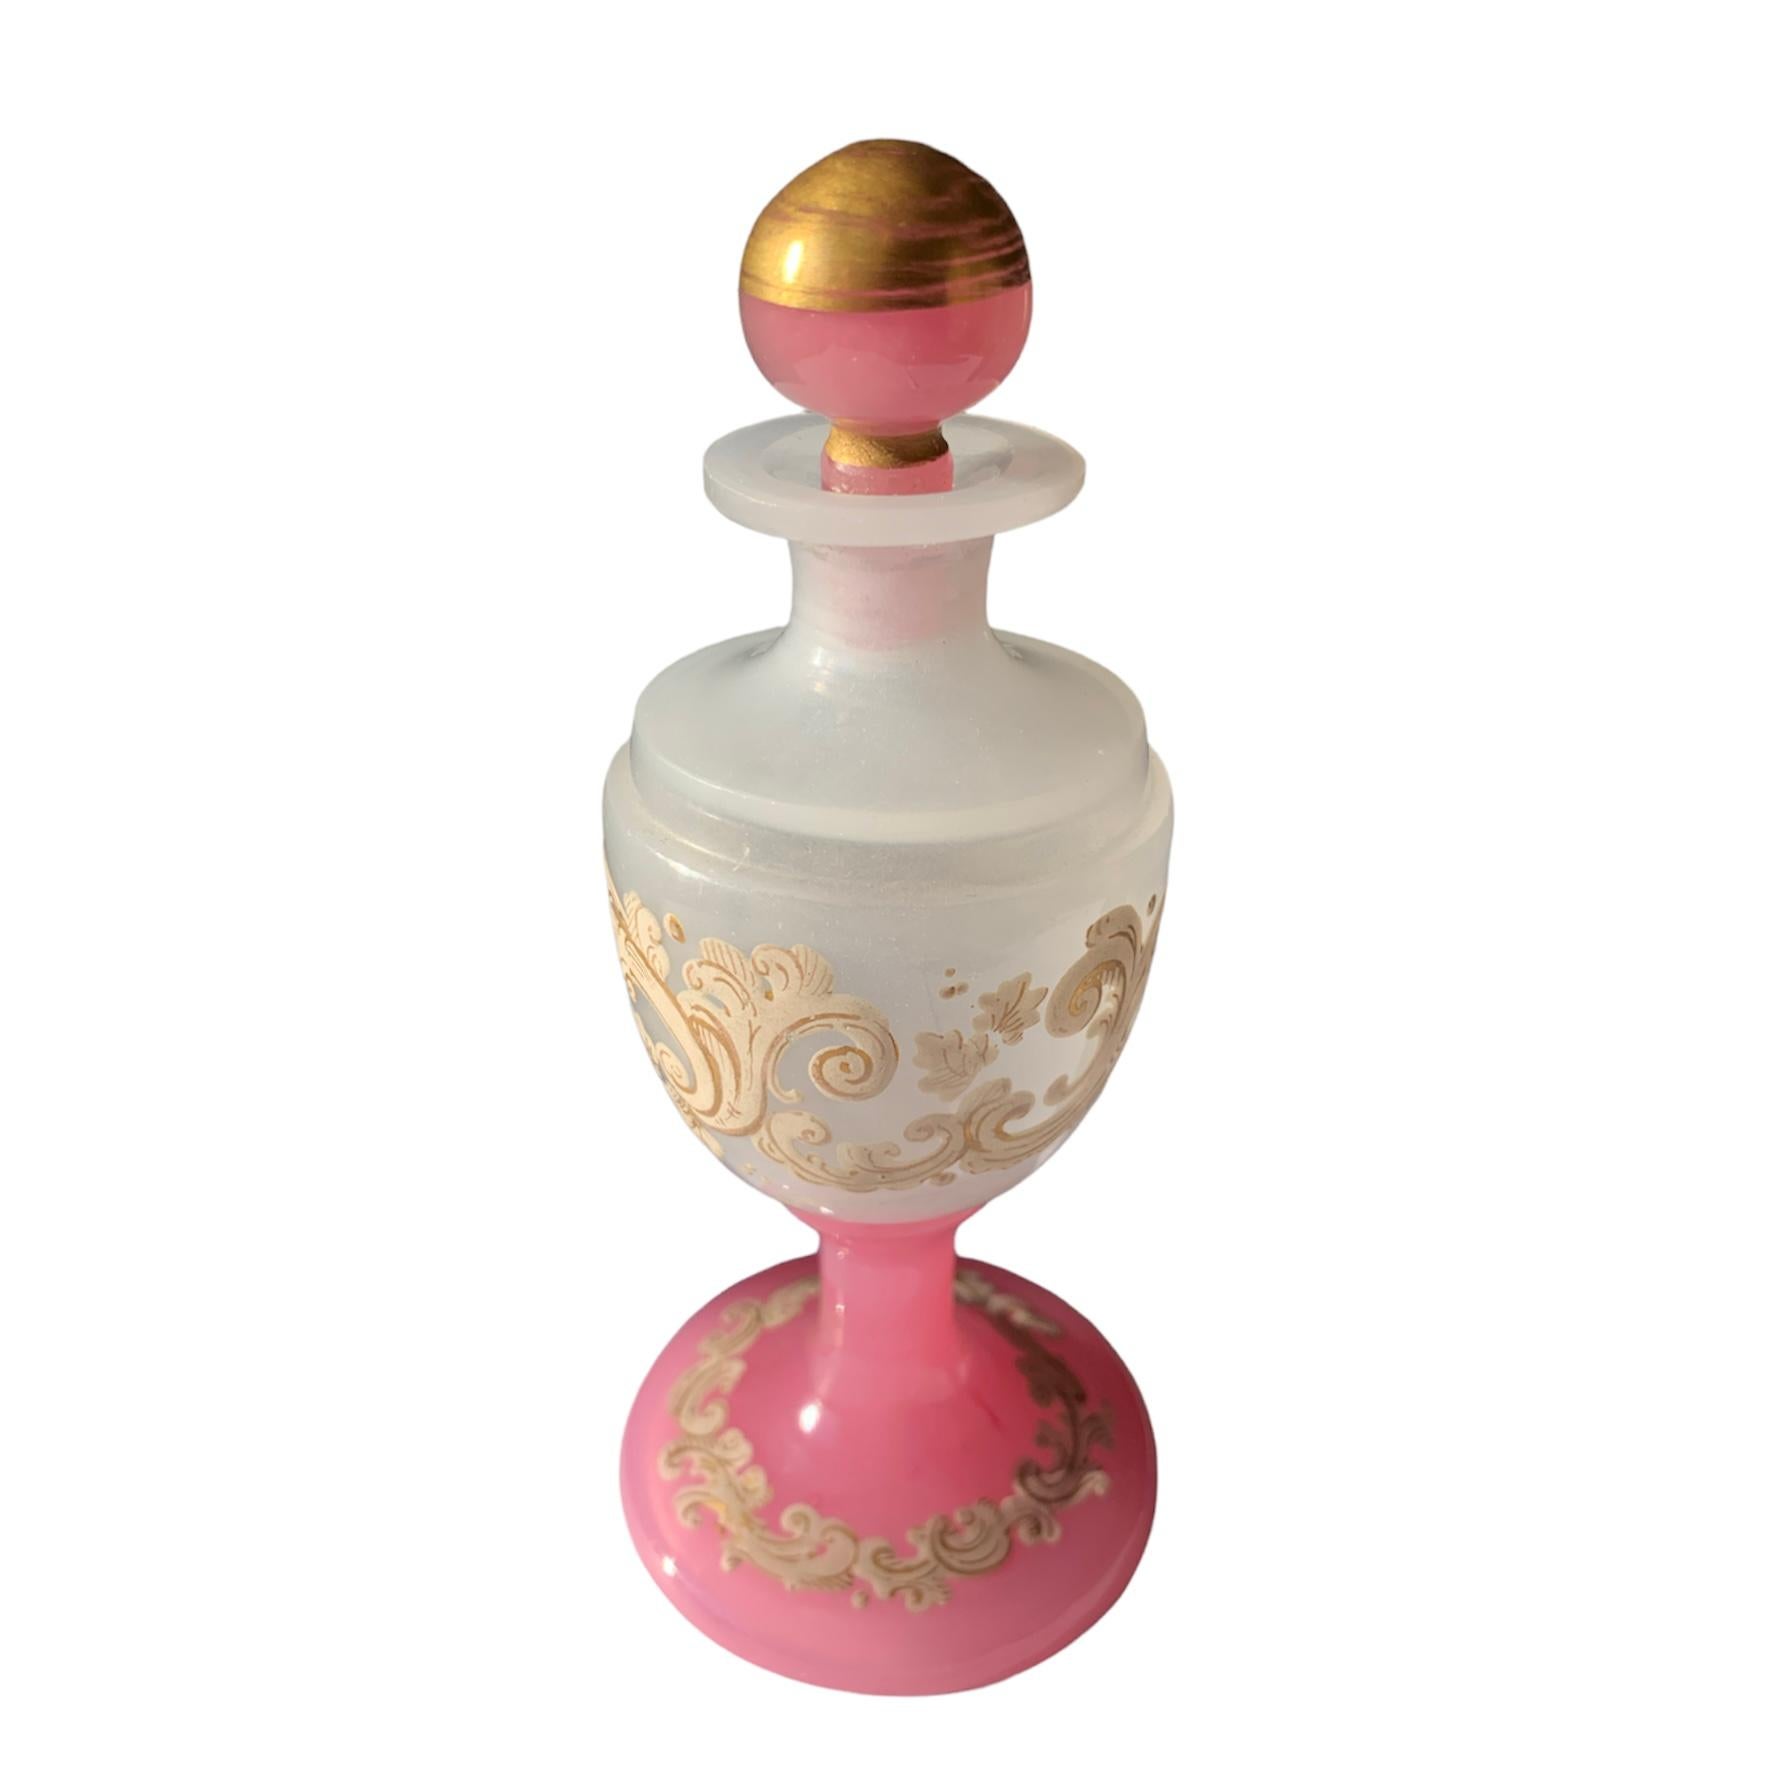 French Antique Pink Opaline Enameled Glass Perfume Bottle, Flacon, 19th Century For Sale